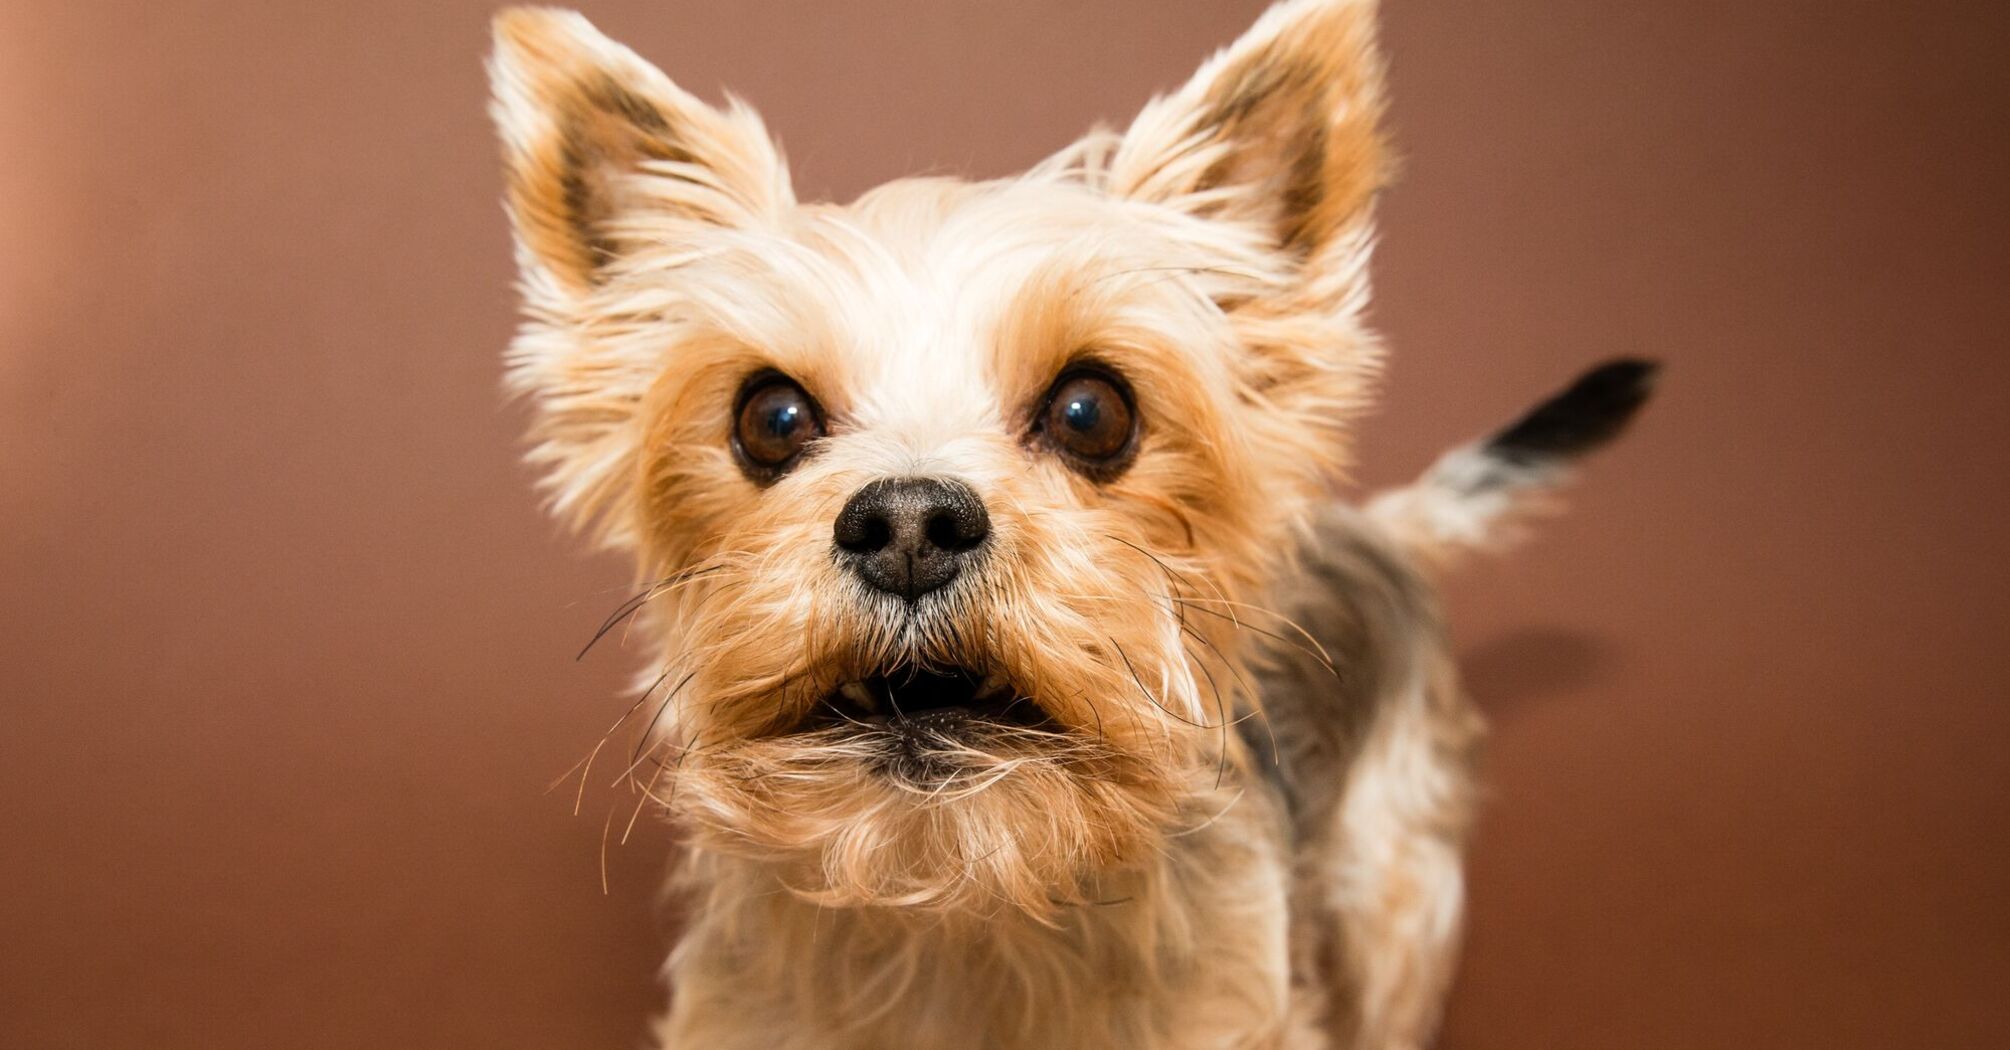 A Yorkshire Terrier with an alert expression, facing the camera against a plain background